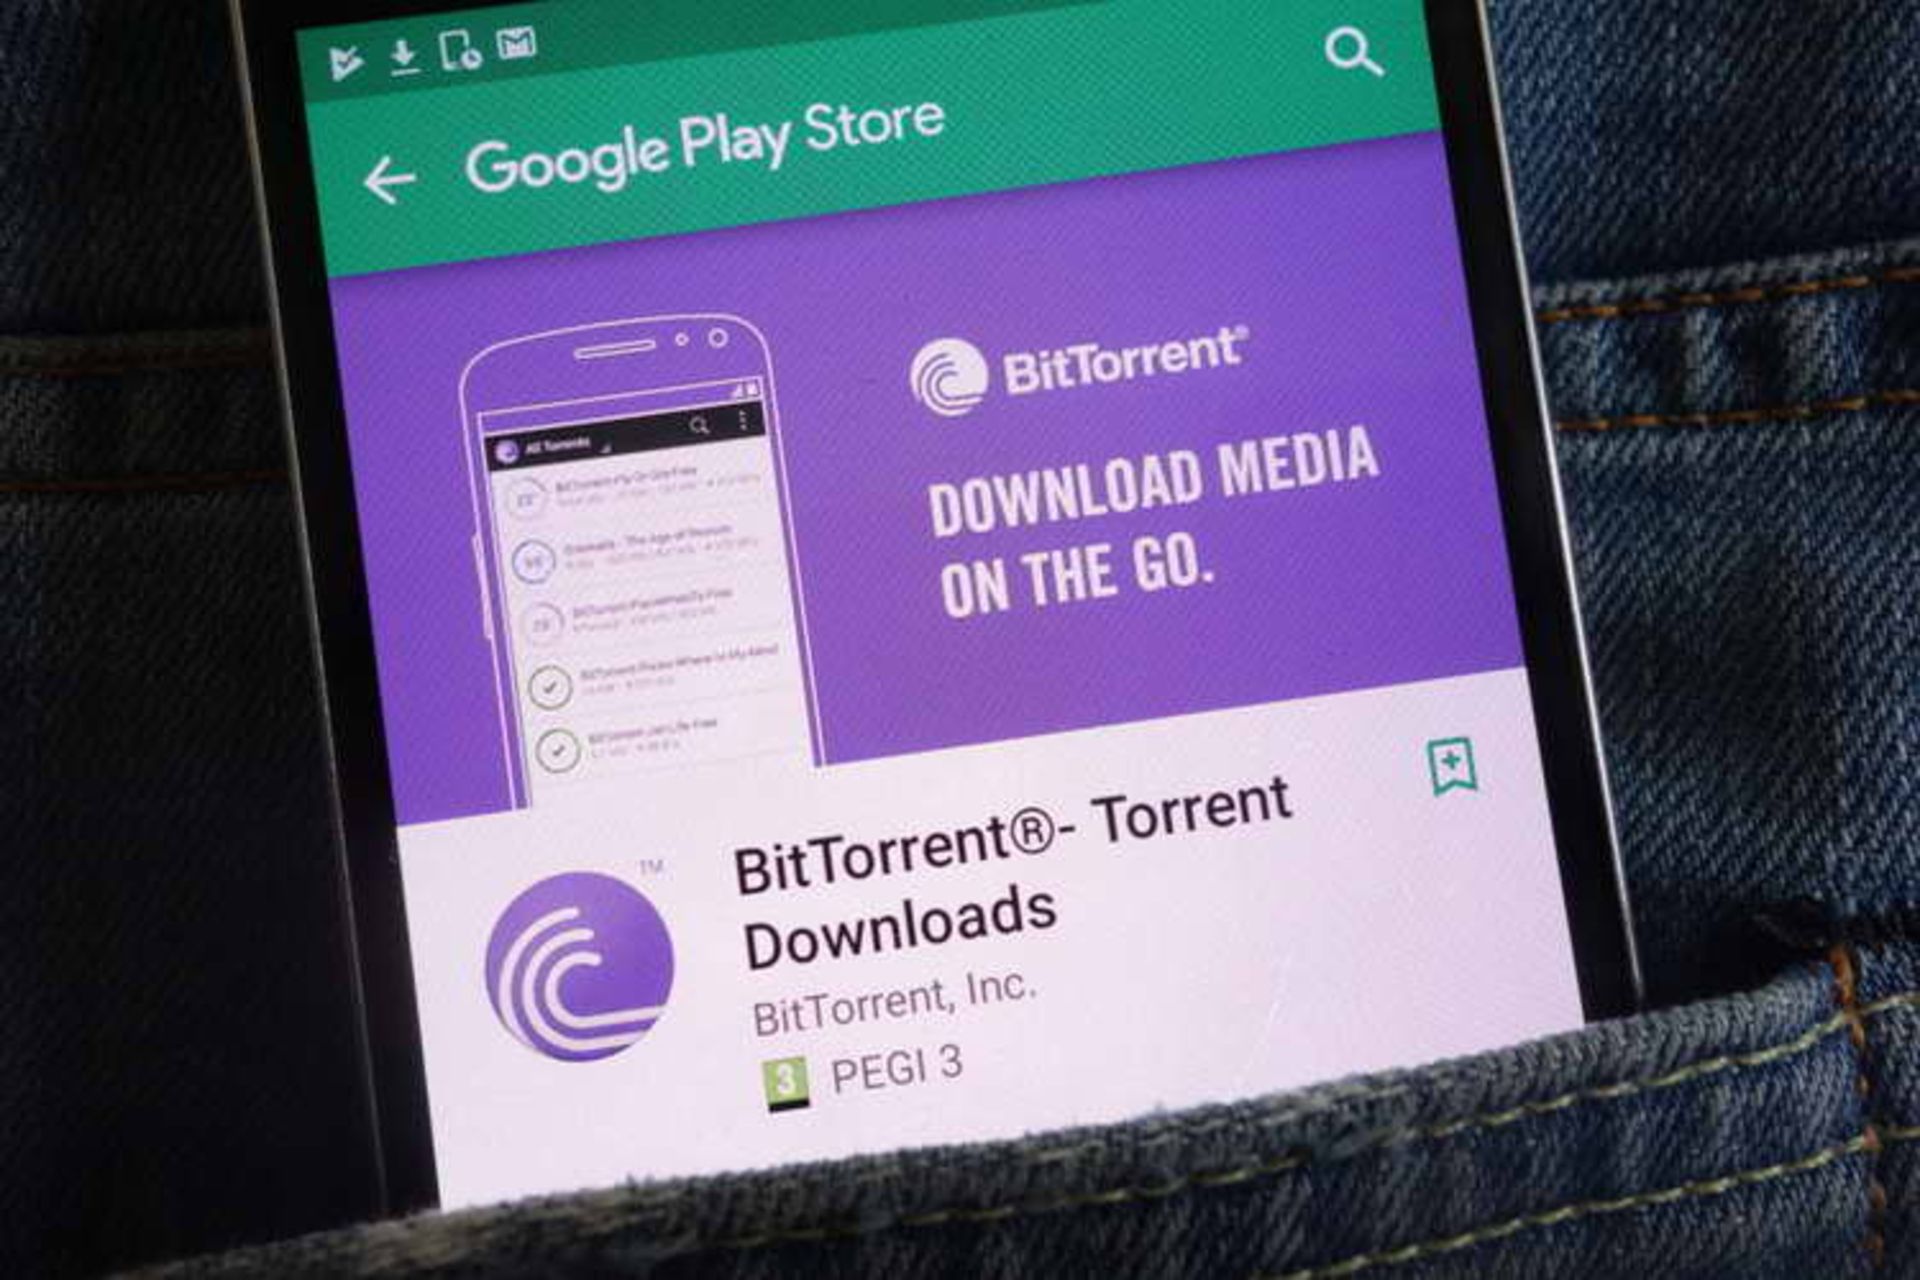 Bittorrent’s creator is developing a new cryptocurrency